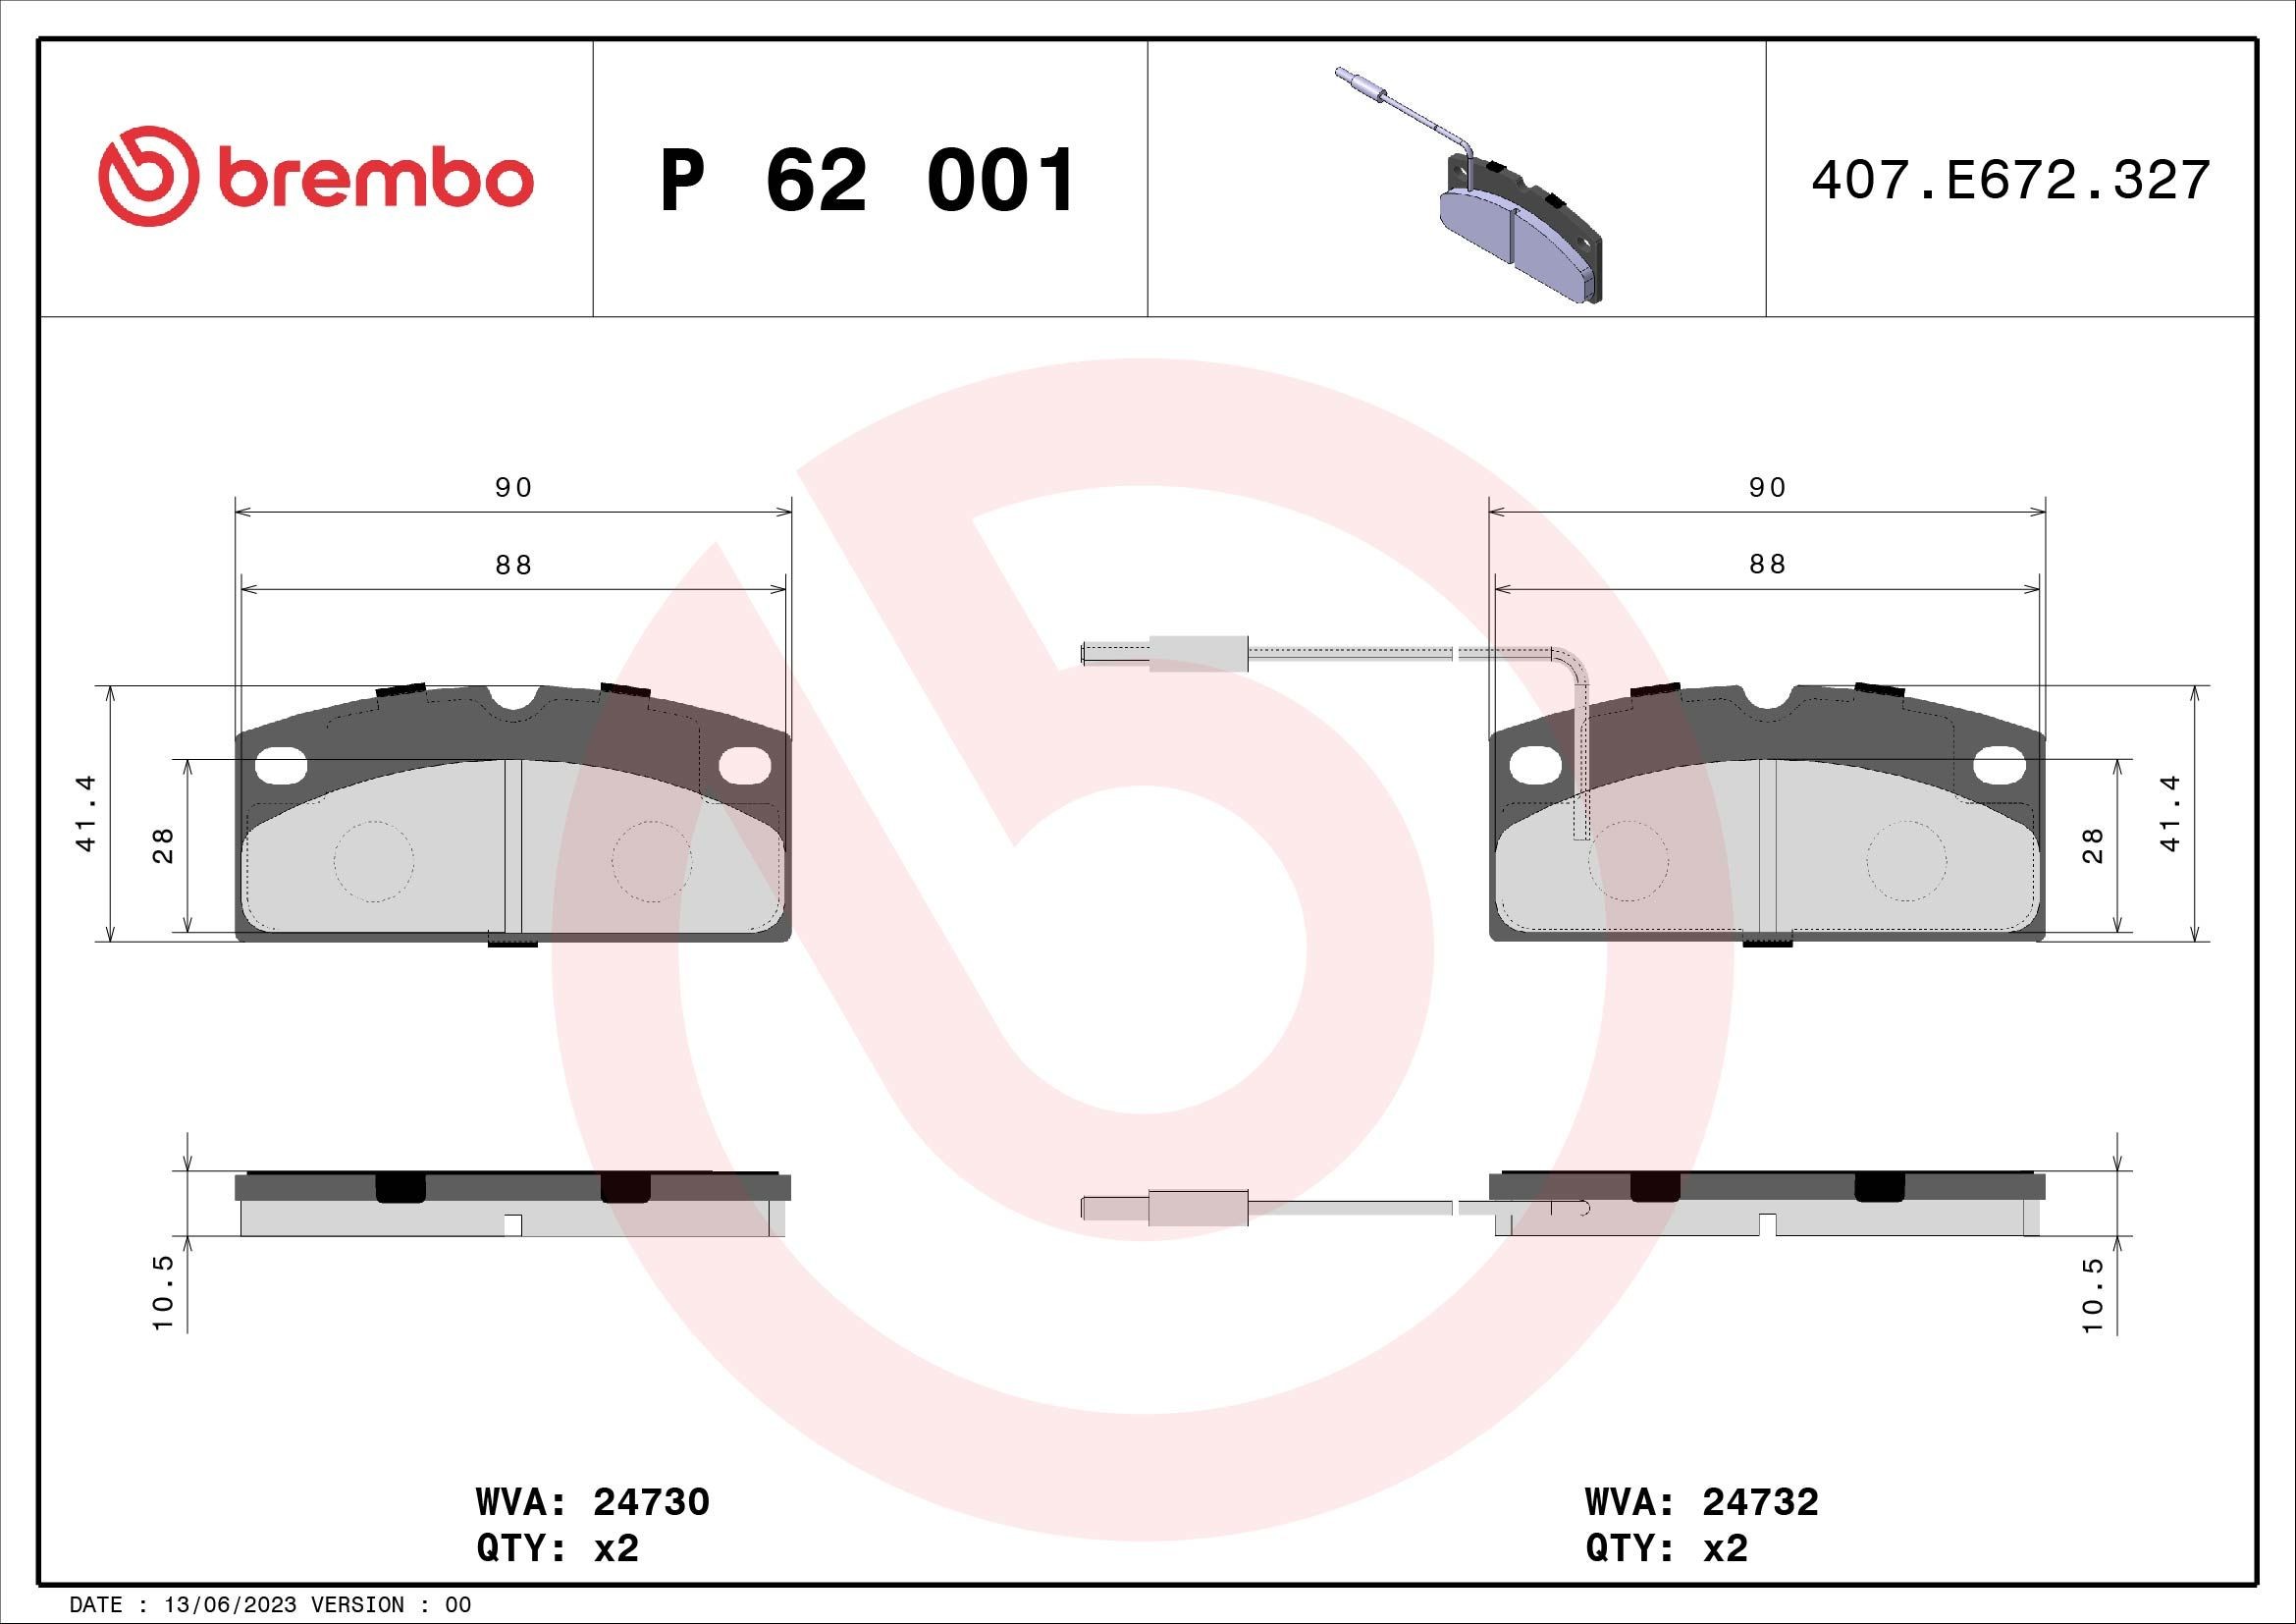 BREMBO P 62 001 Brake pad set incl. wear warning contact, without accessories